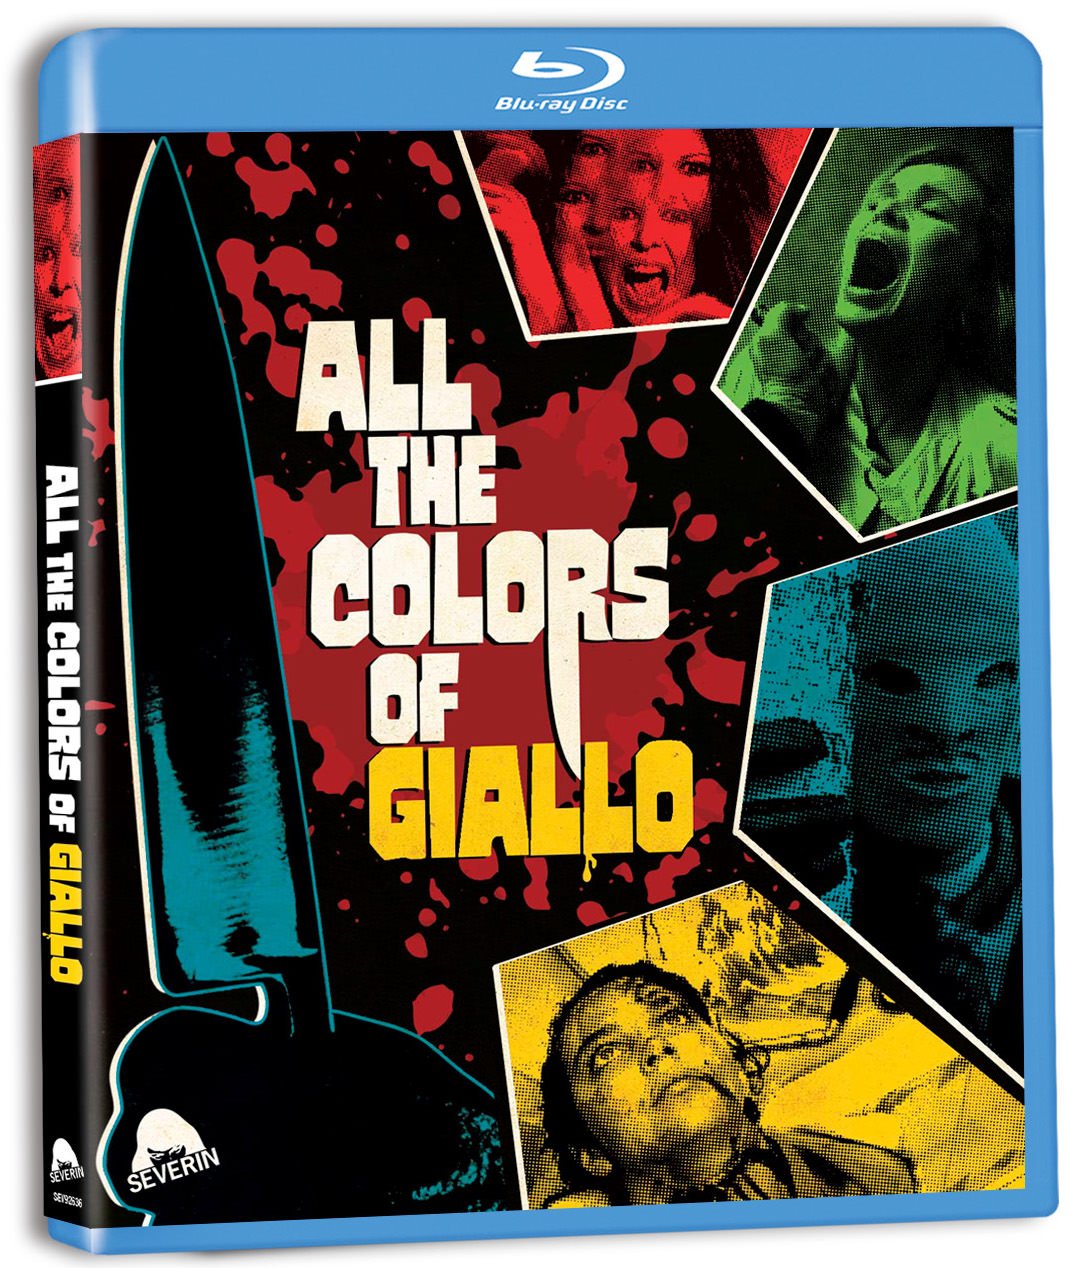 All The Colors of Giallo [3-Disc Blu-ray]